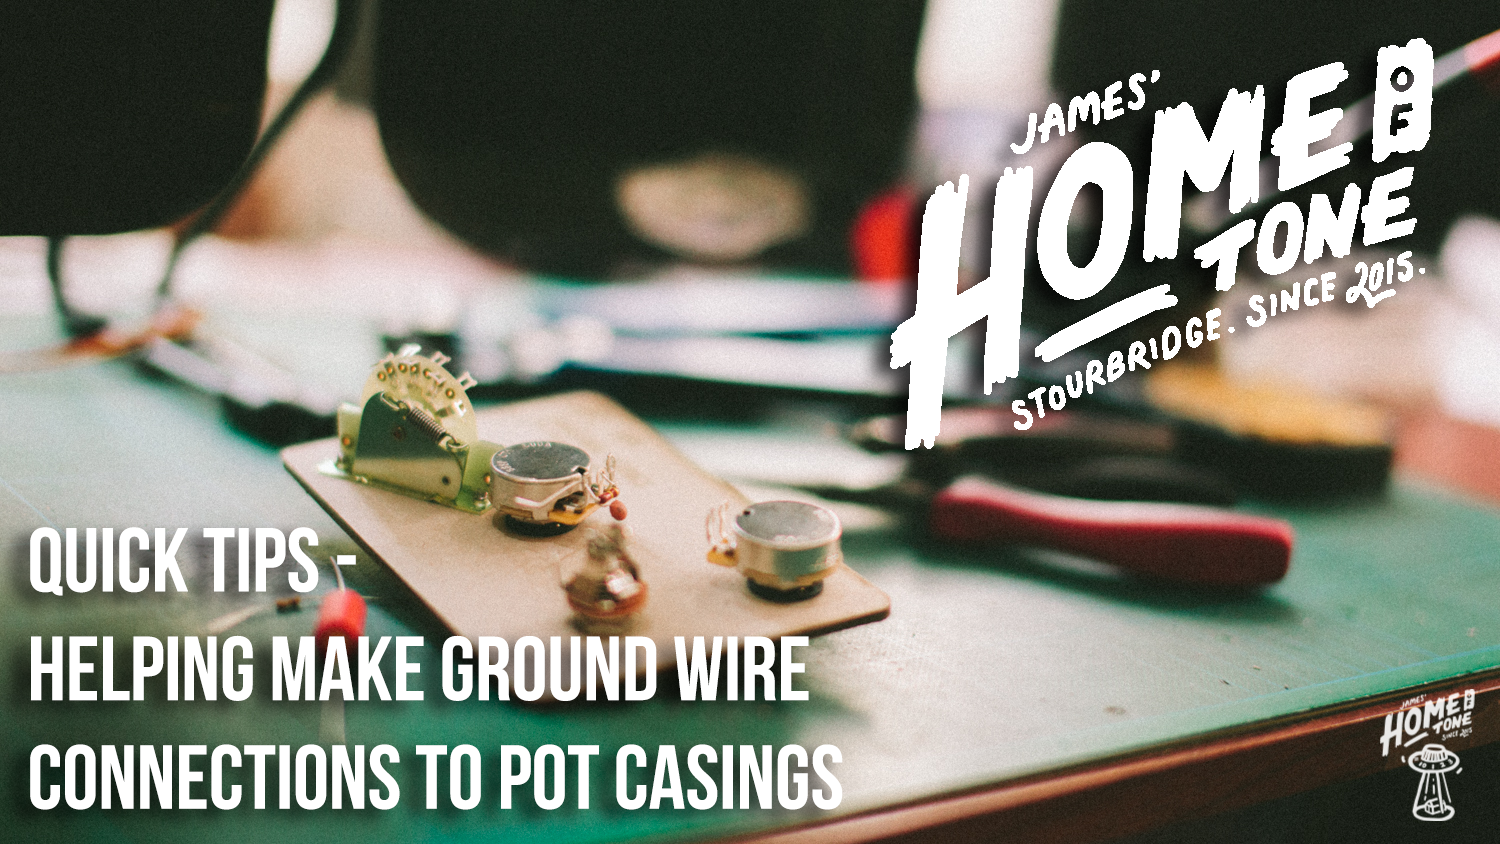 Helping prepare and make ground wire connections to guitar pot casings video